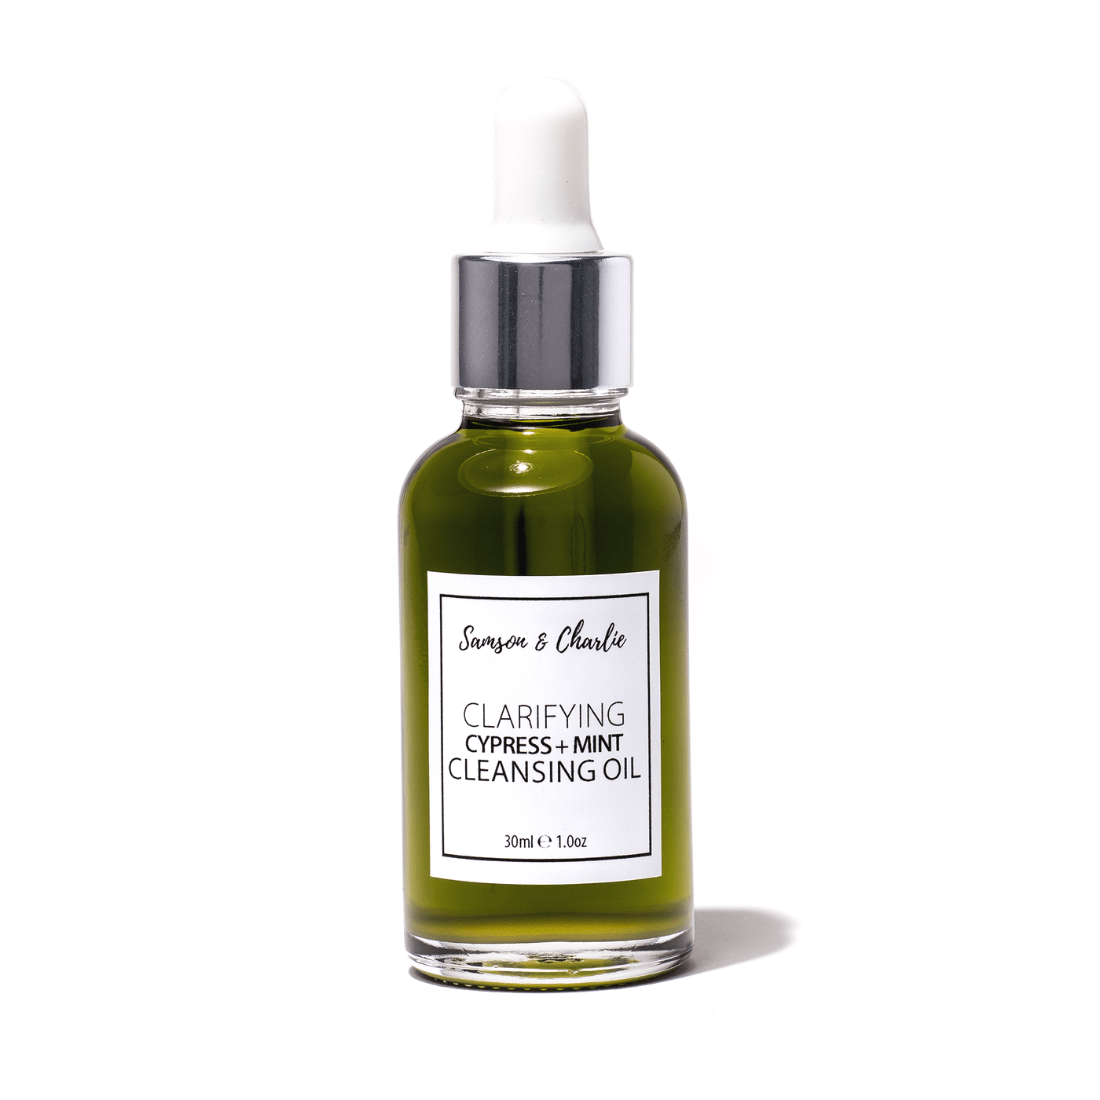 Samson & Charlie Cleansing Oil 30ml Clarifying Cypress + Mint  Cleansing Oil